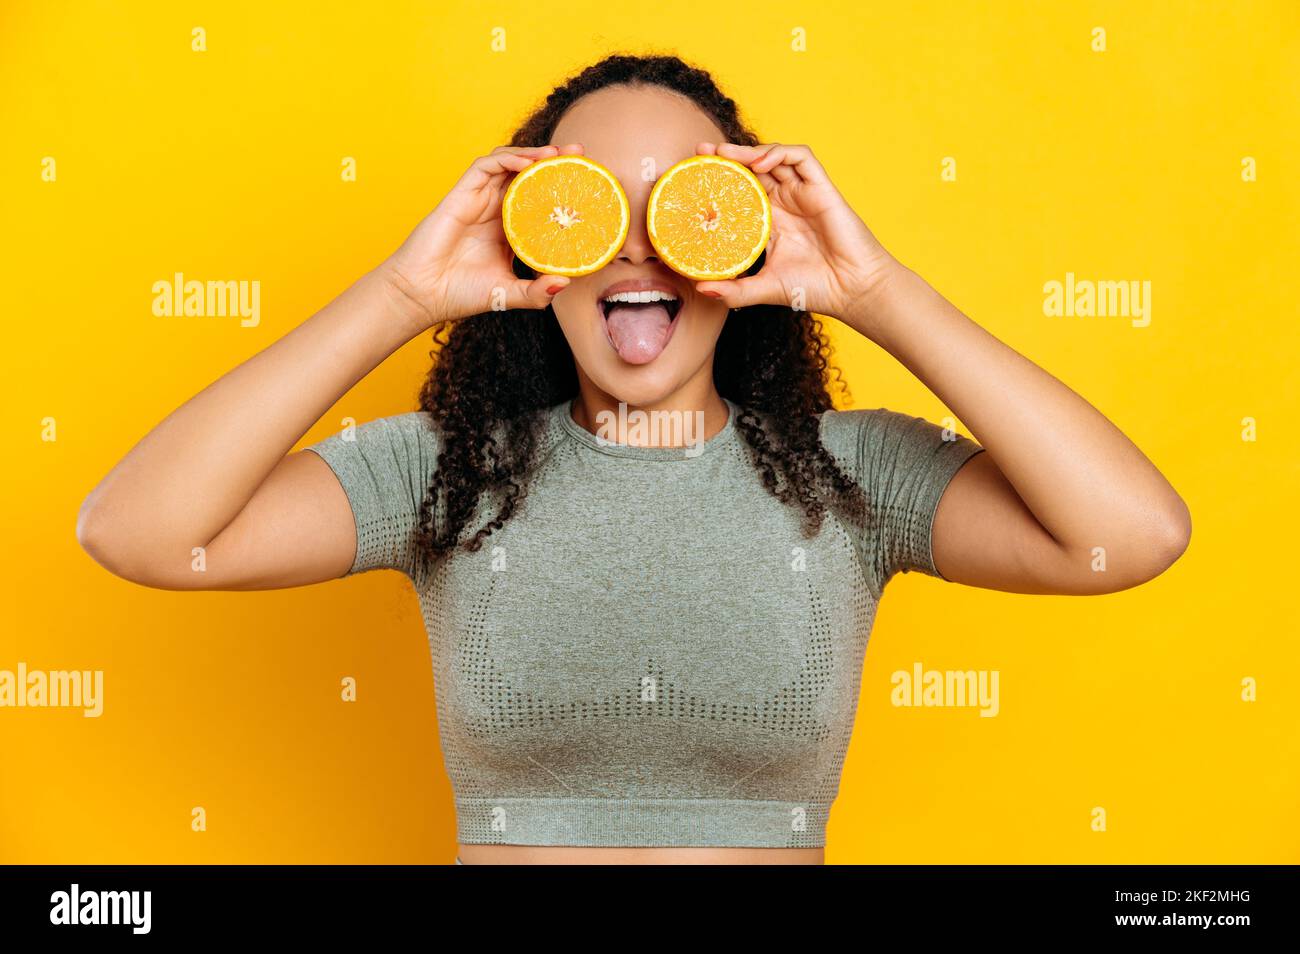 Joyful lovely brazilian or latino young curly haired woman, in sport outfits, standing on isolated orange background, holds two halves orange in her hands near eyes, shows tongue, smiling Stock Photo